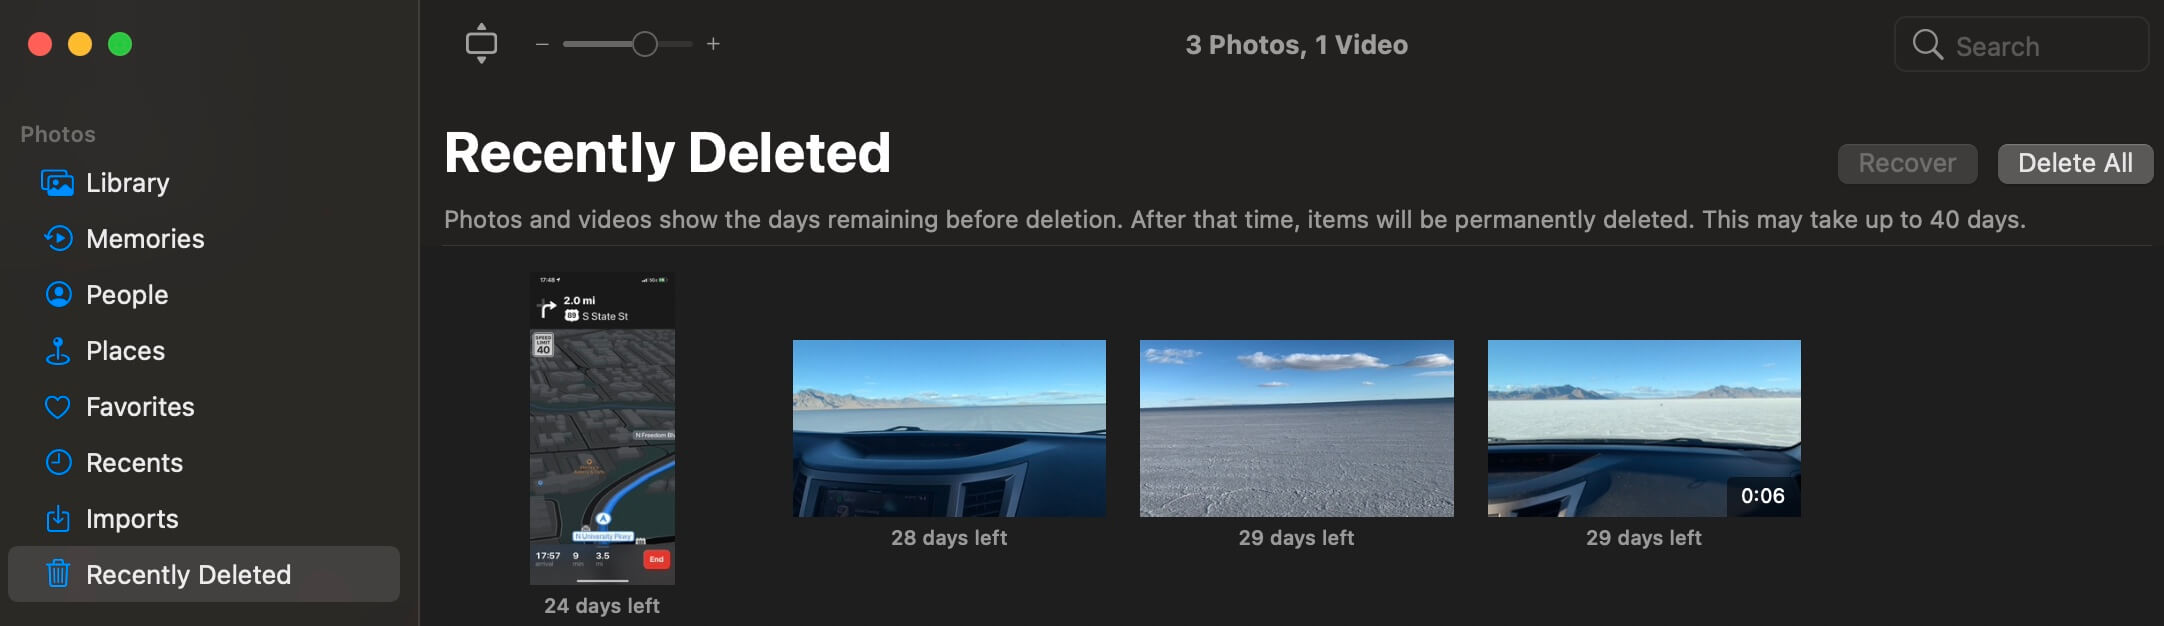 viewing recently deleted photos